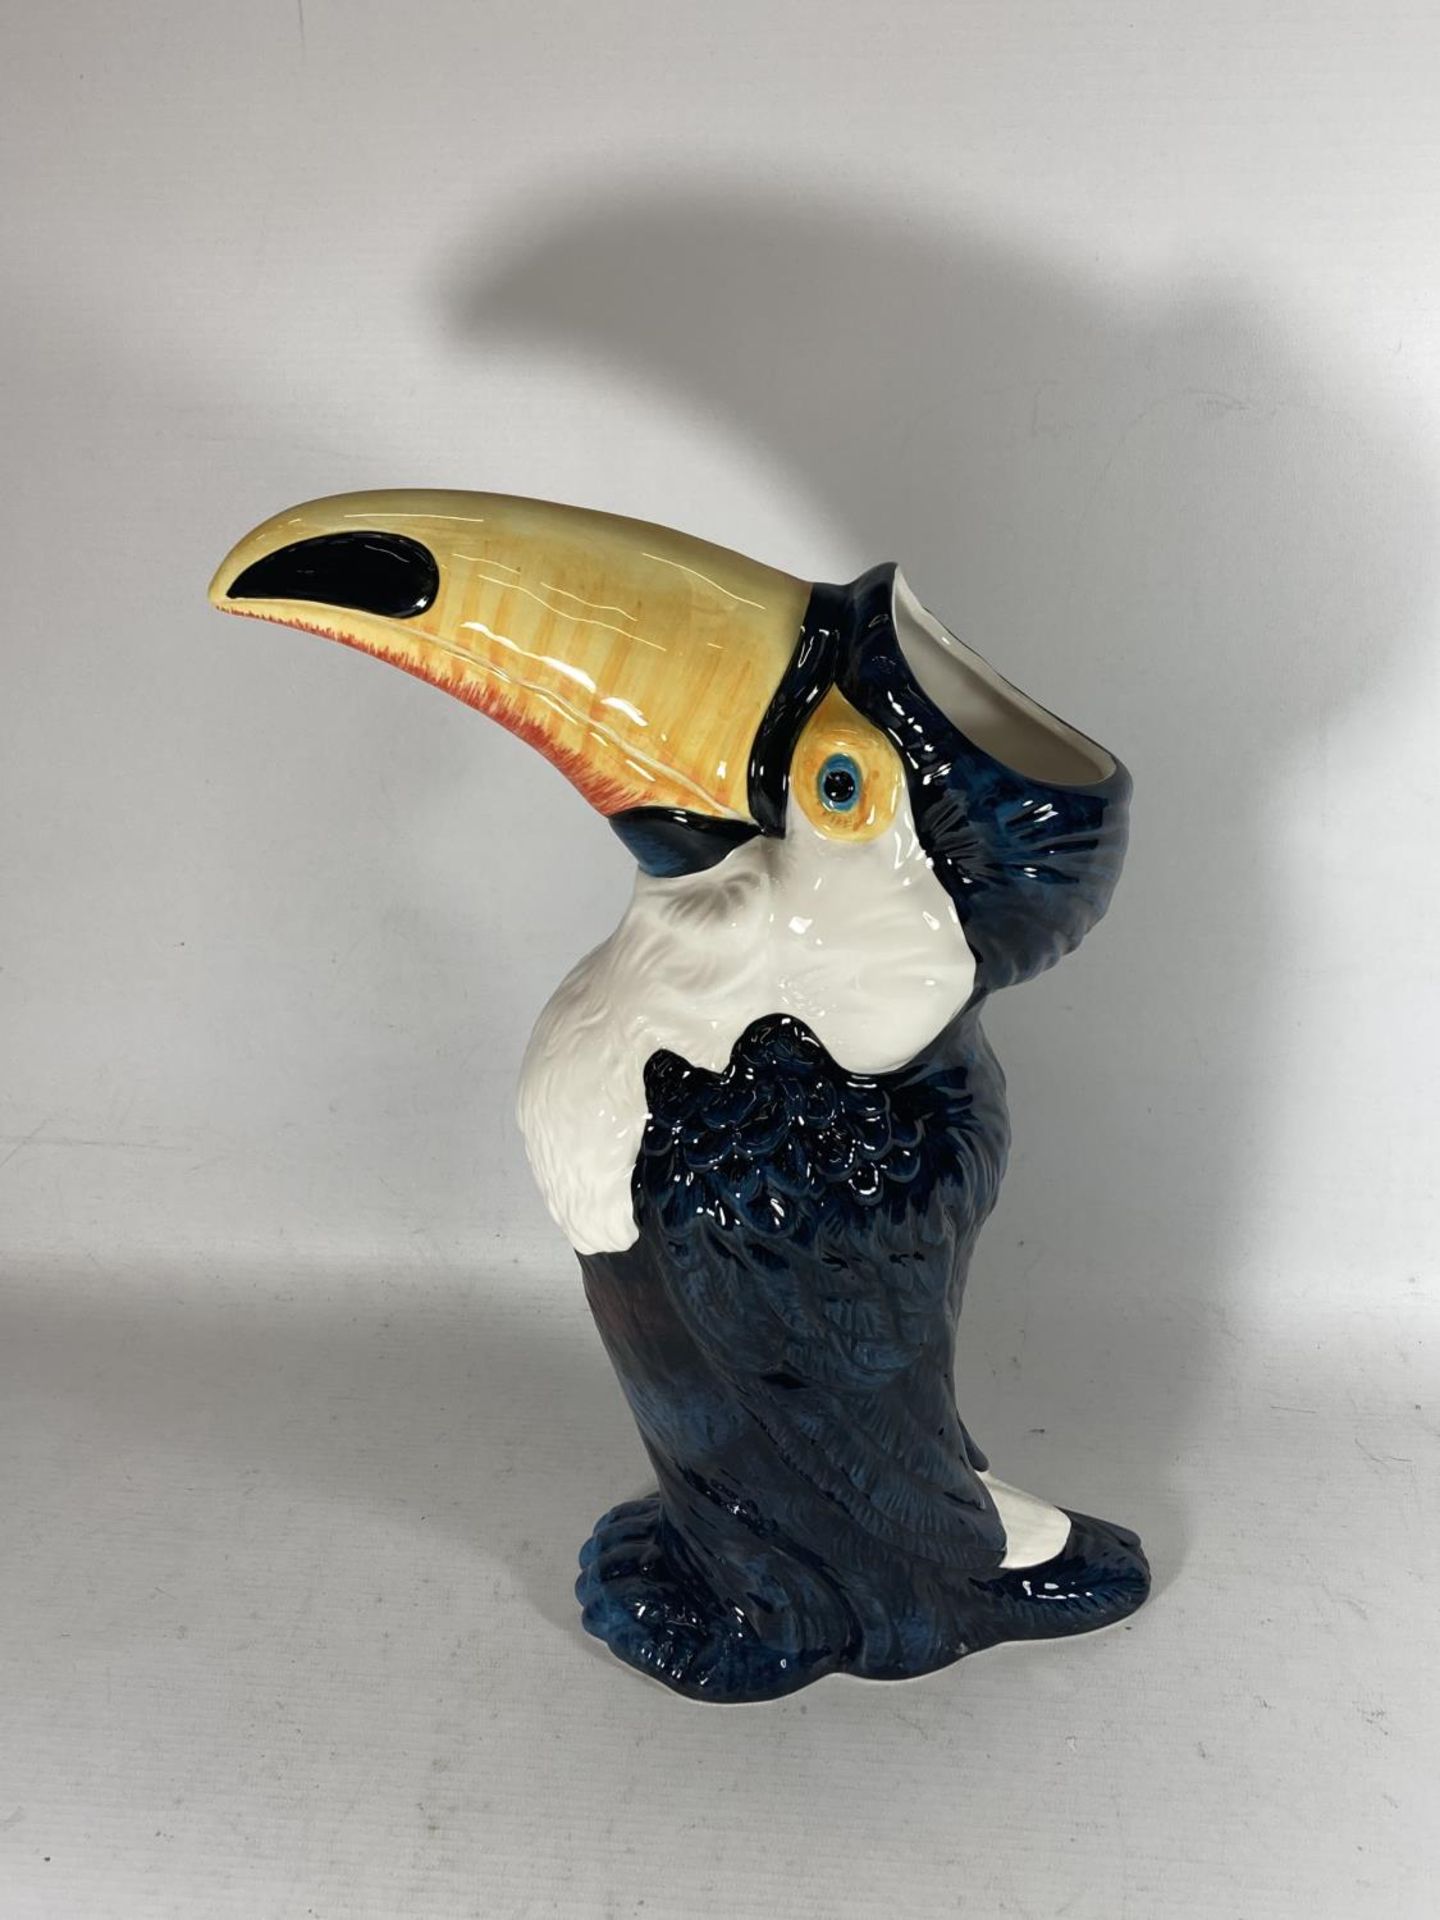 A VERY LARGE CERAMIC TOUCAN